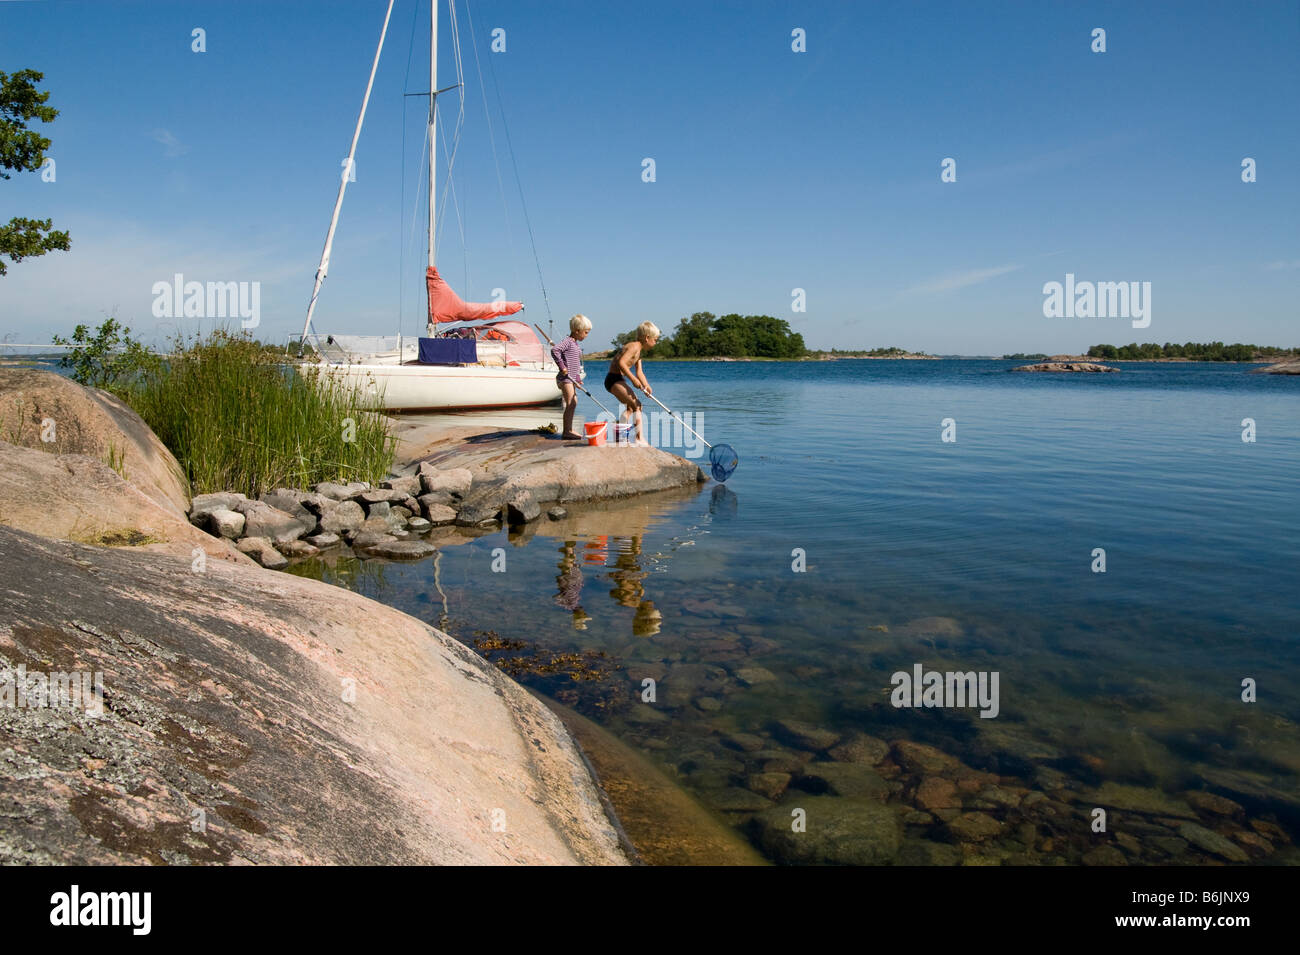 young boys fishing with landing net and sailboat in background Stock Photo